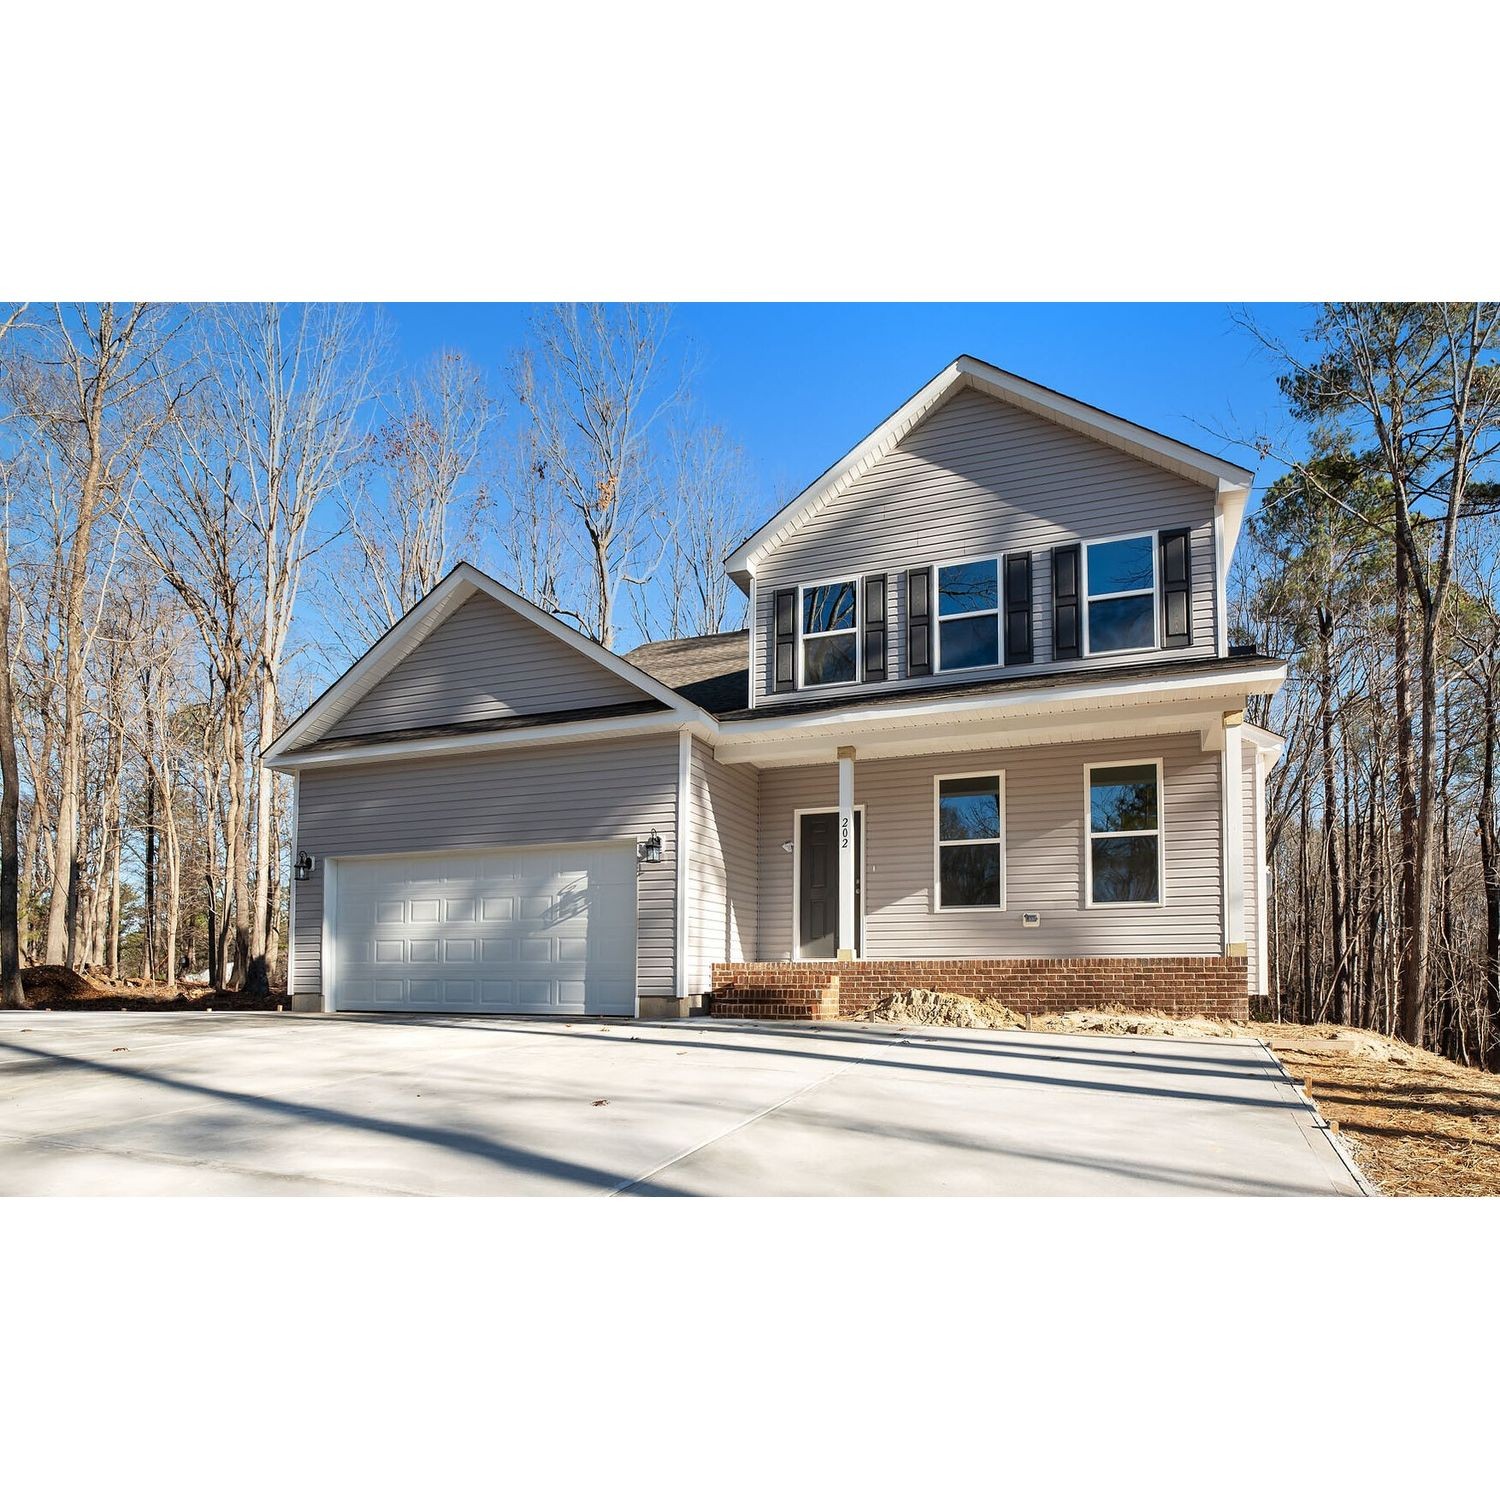 3. Valuebuild Homes - Greenville Nc - Build On Your L